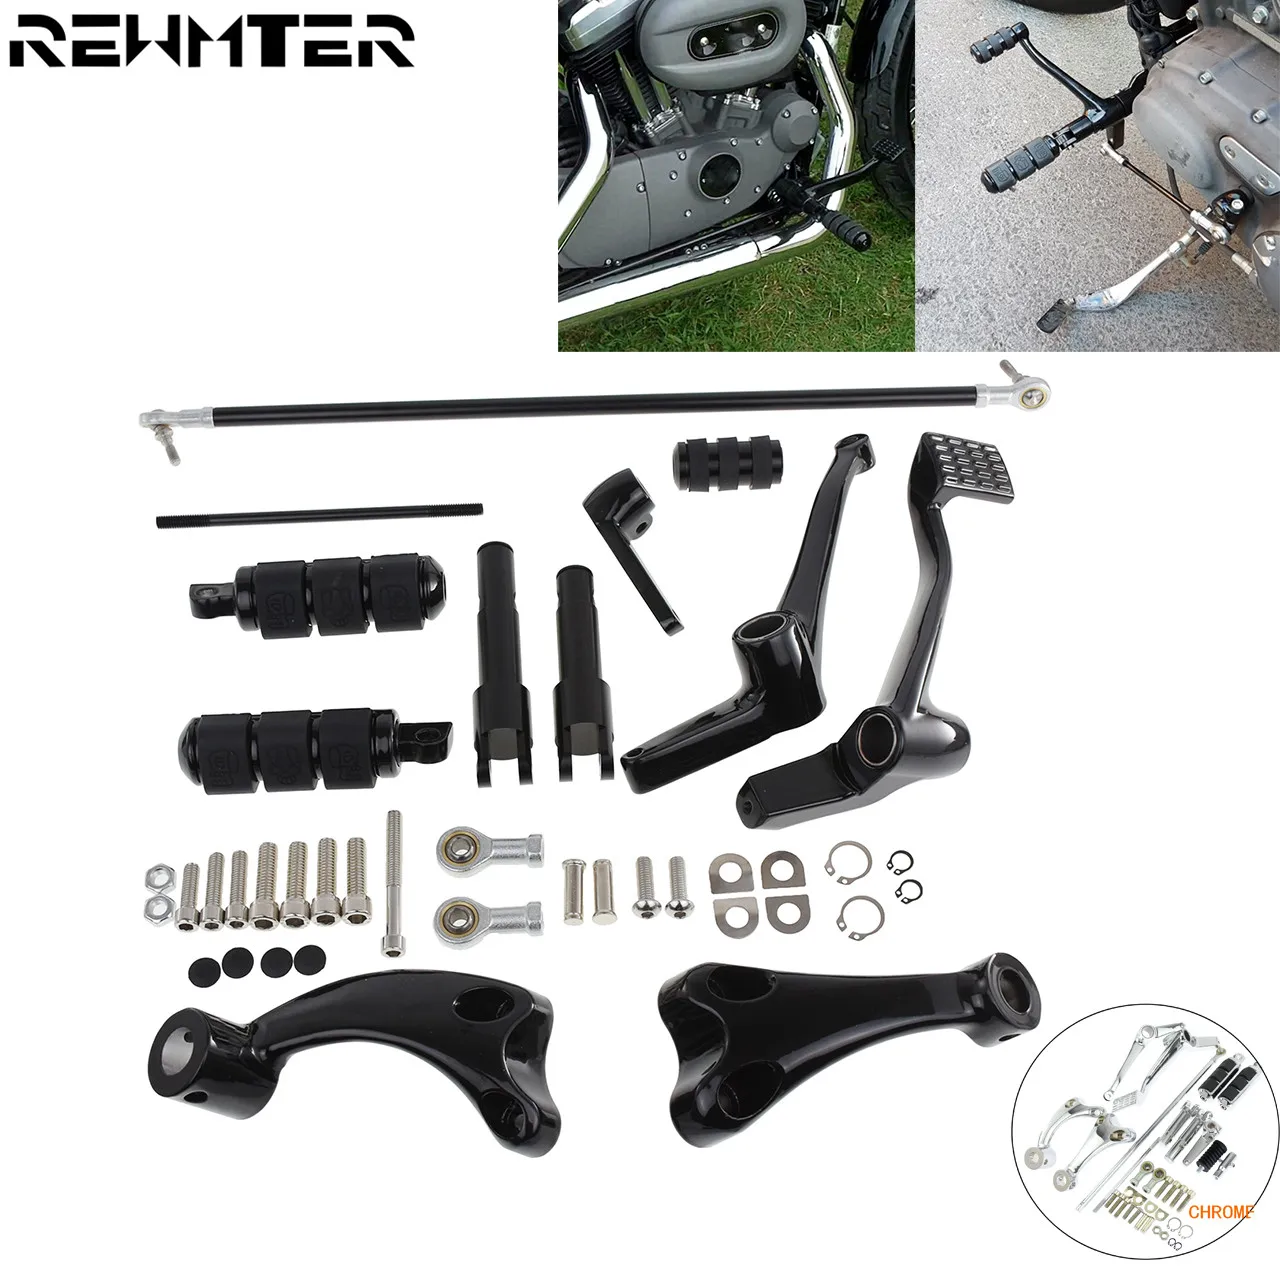 Compatible with 1991-2003 Harley Sportster XL 1200 883 Forward Controls Pegs Levers Linkages Chrome Kit 